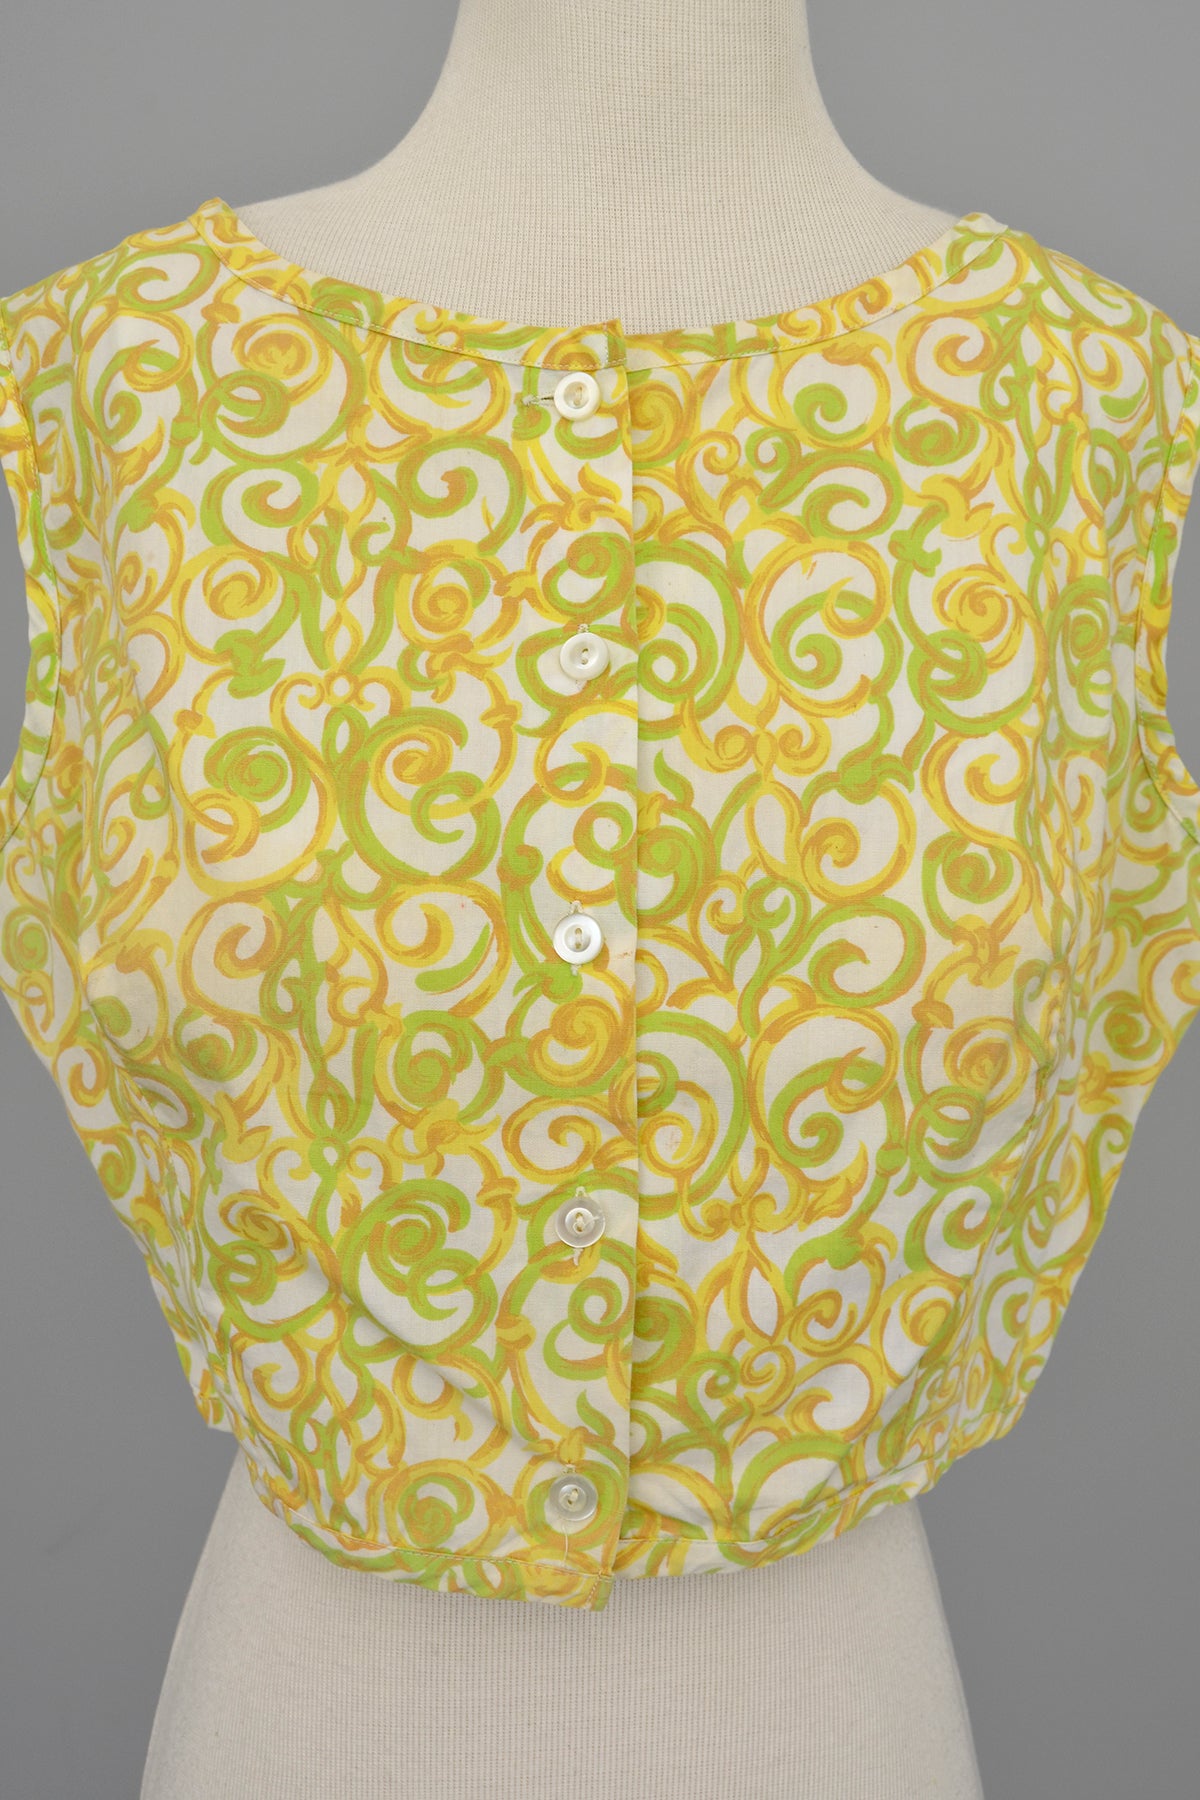 1950s Lemon and Lime Swirl Print Retro Cropped Top | Pinup Top | M/L 38"+ Bust